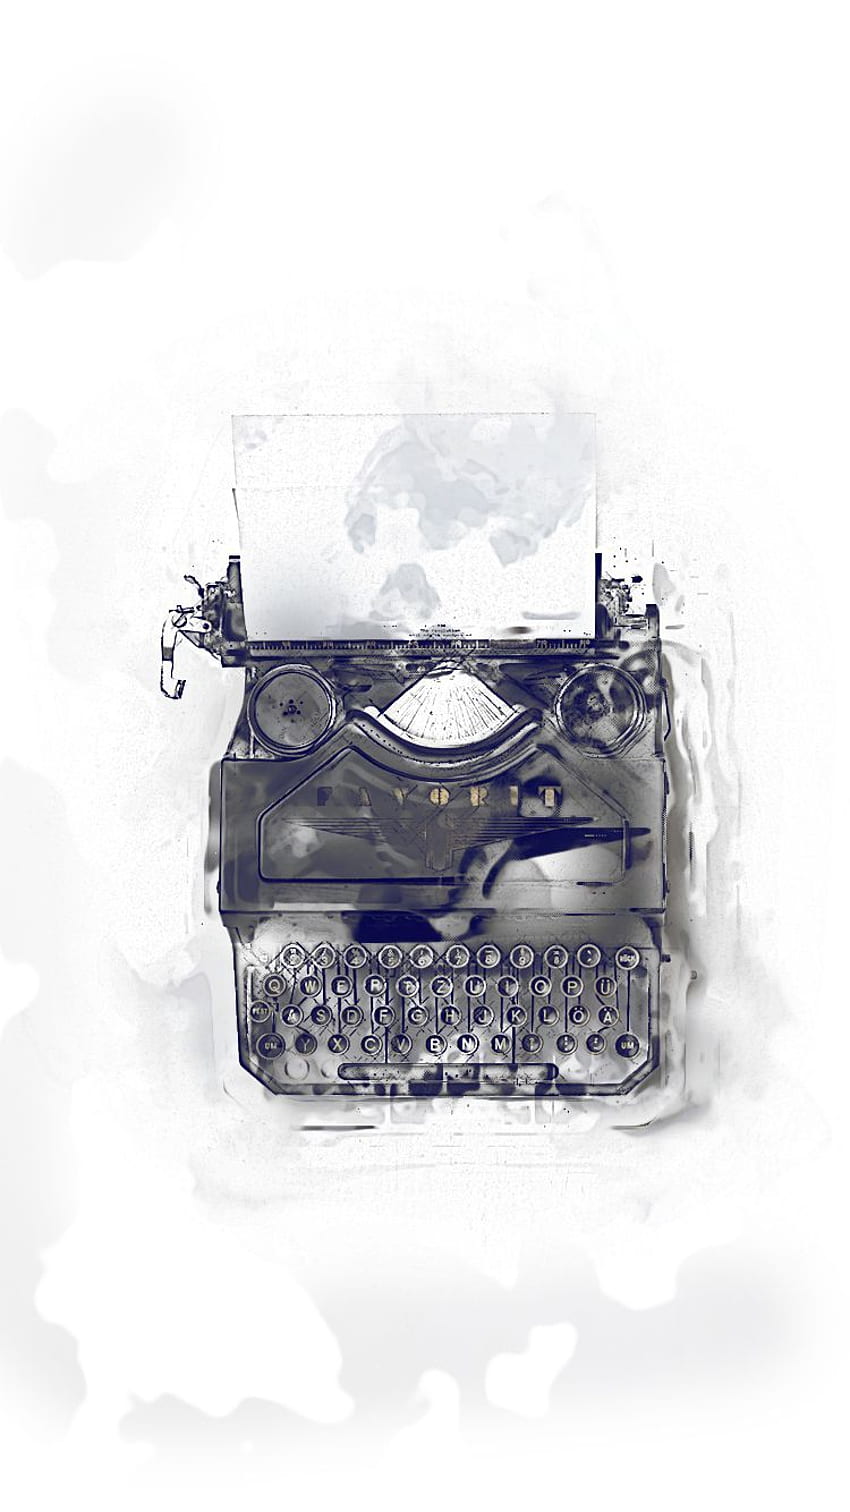 Typewriter IPhone 6 . Watercolor Styled Type Hypewriter. Need I Use More Adjectives?. Artsy Iphone, IPhone Vintage, IPhone Art, Antique Typewriter HD phone wallpaper